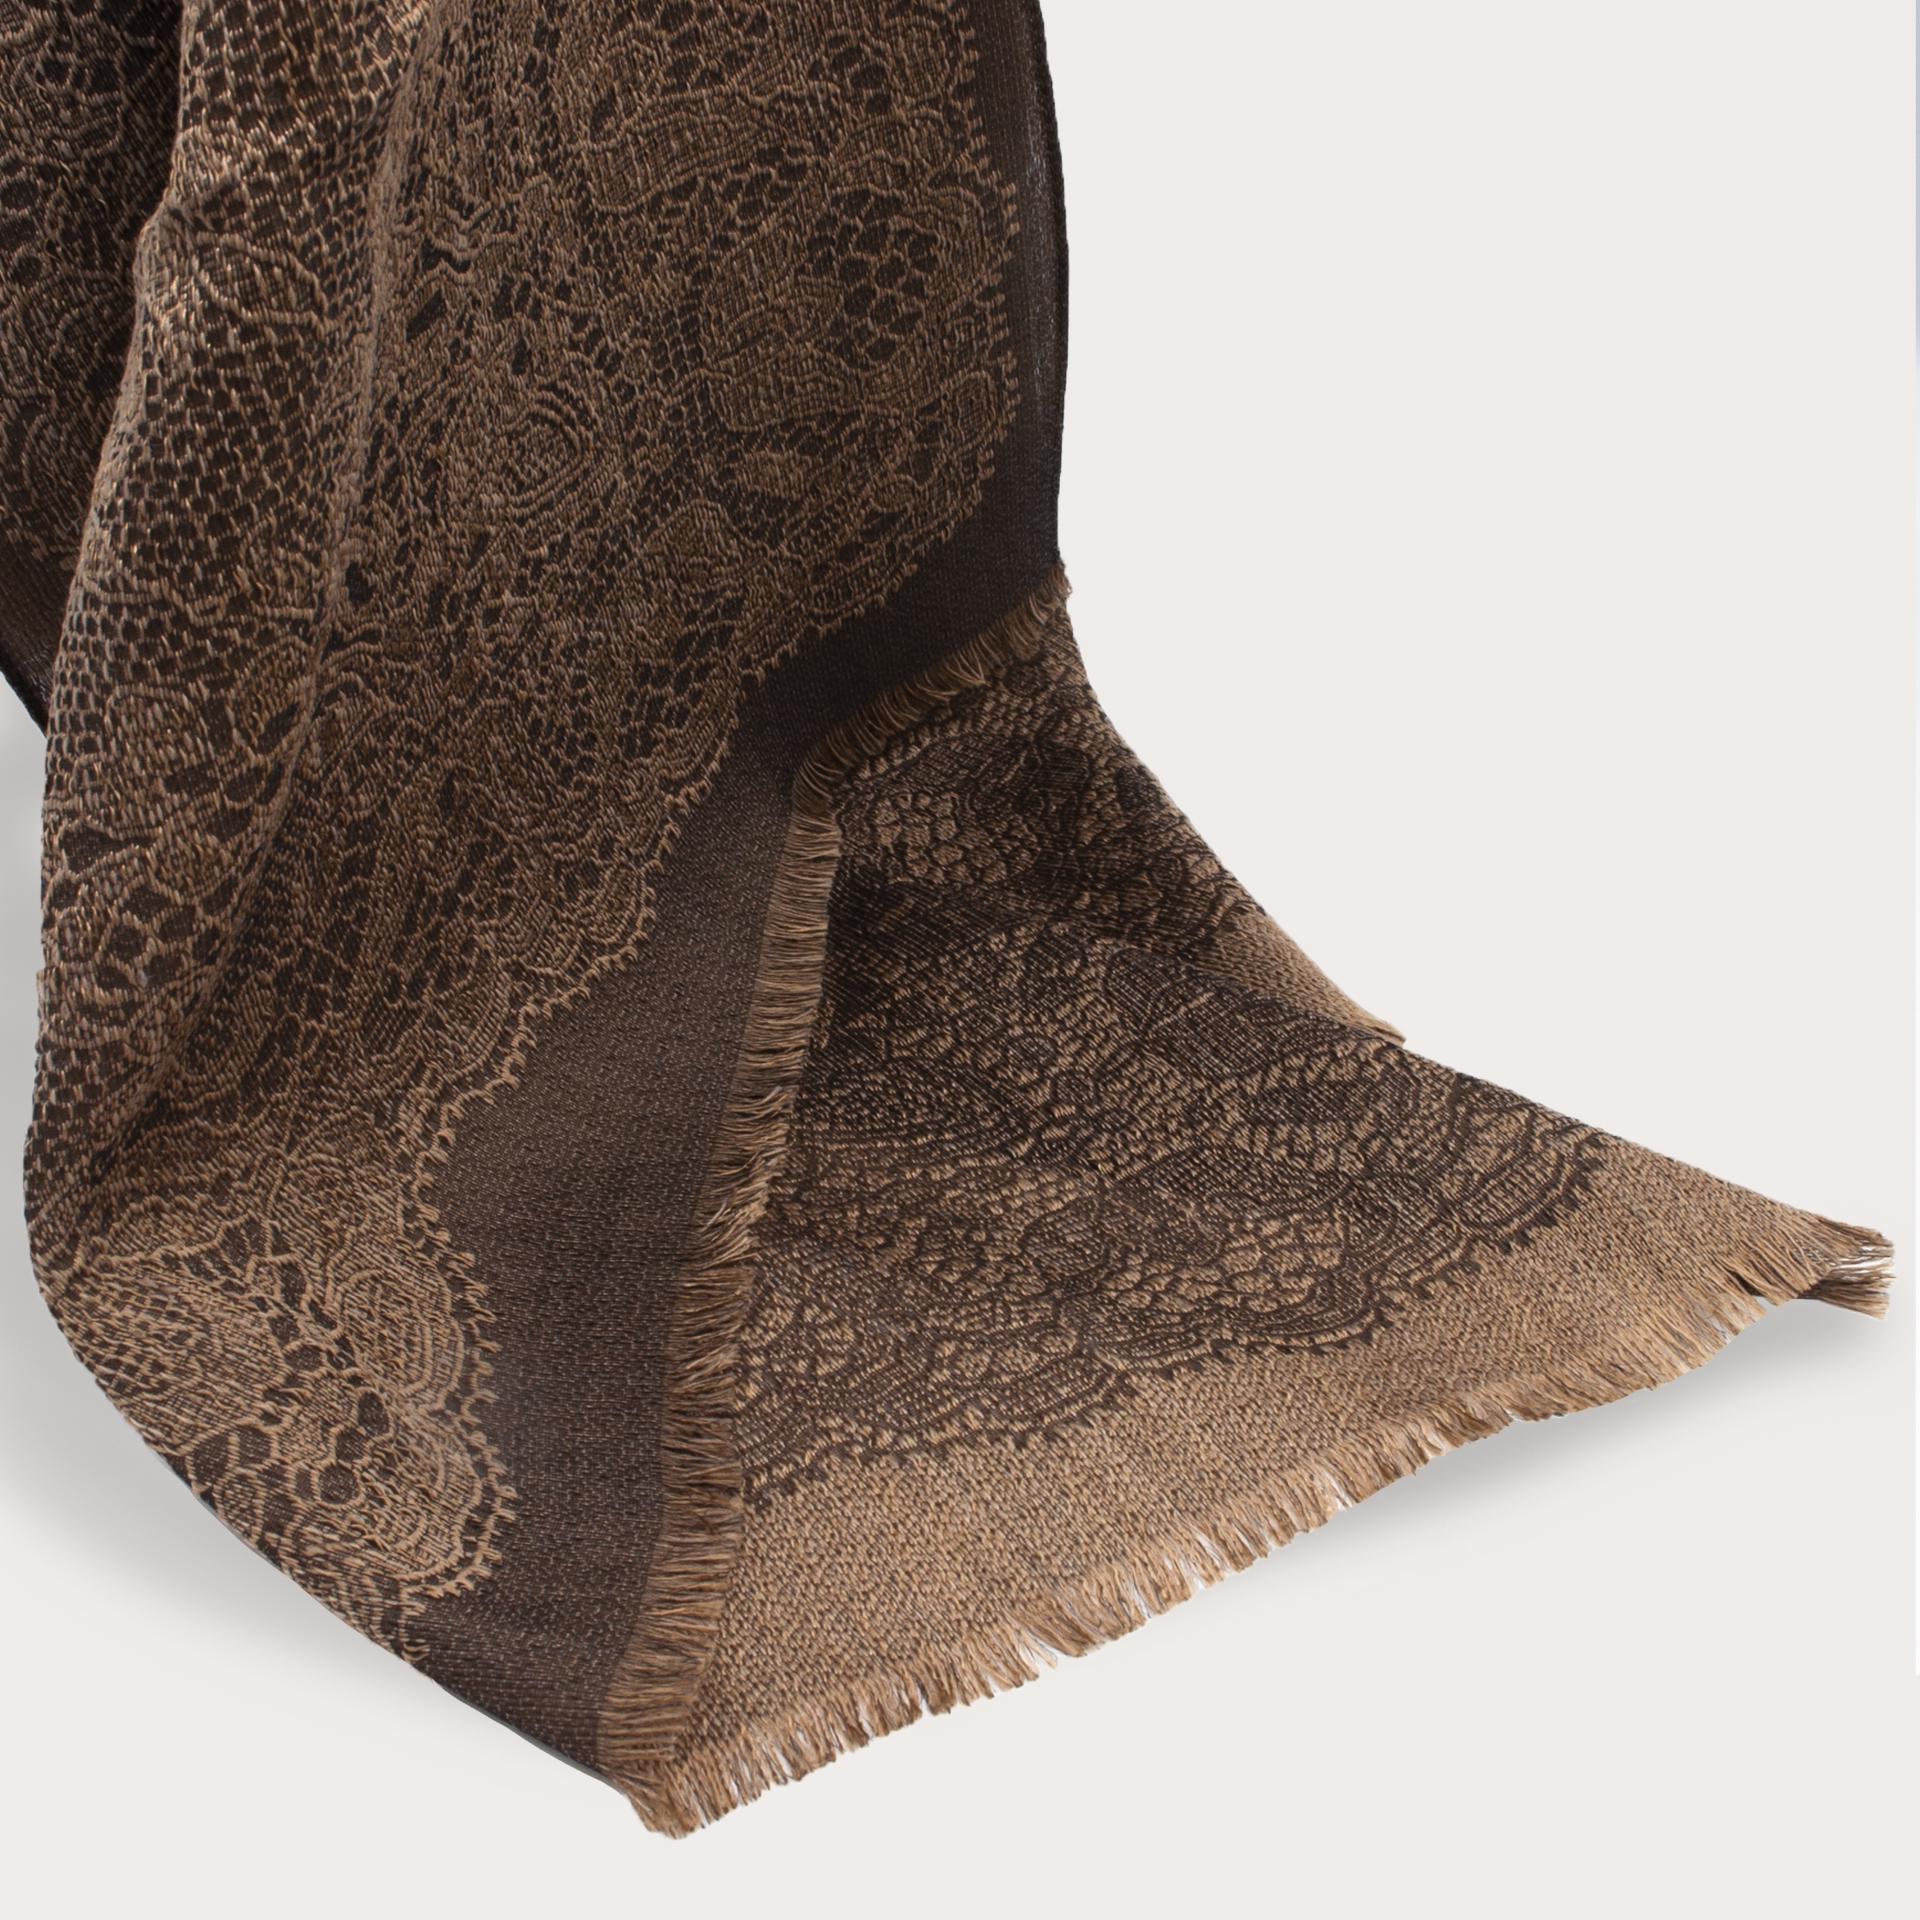 BRUCLE Virgin wool scarf with lace pattern, brown and bright beige